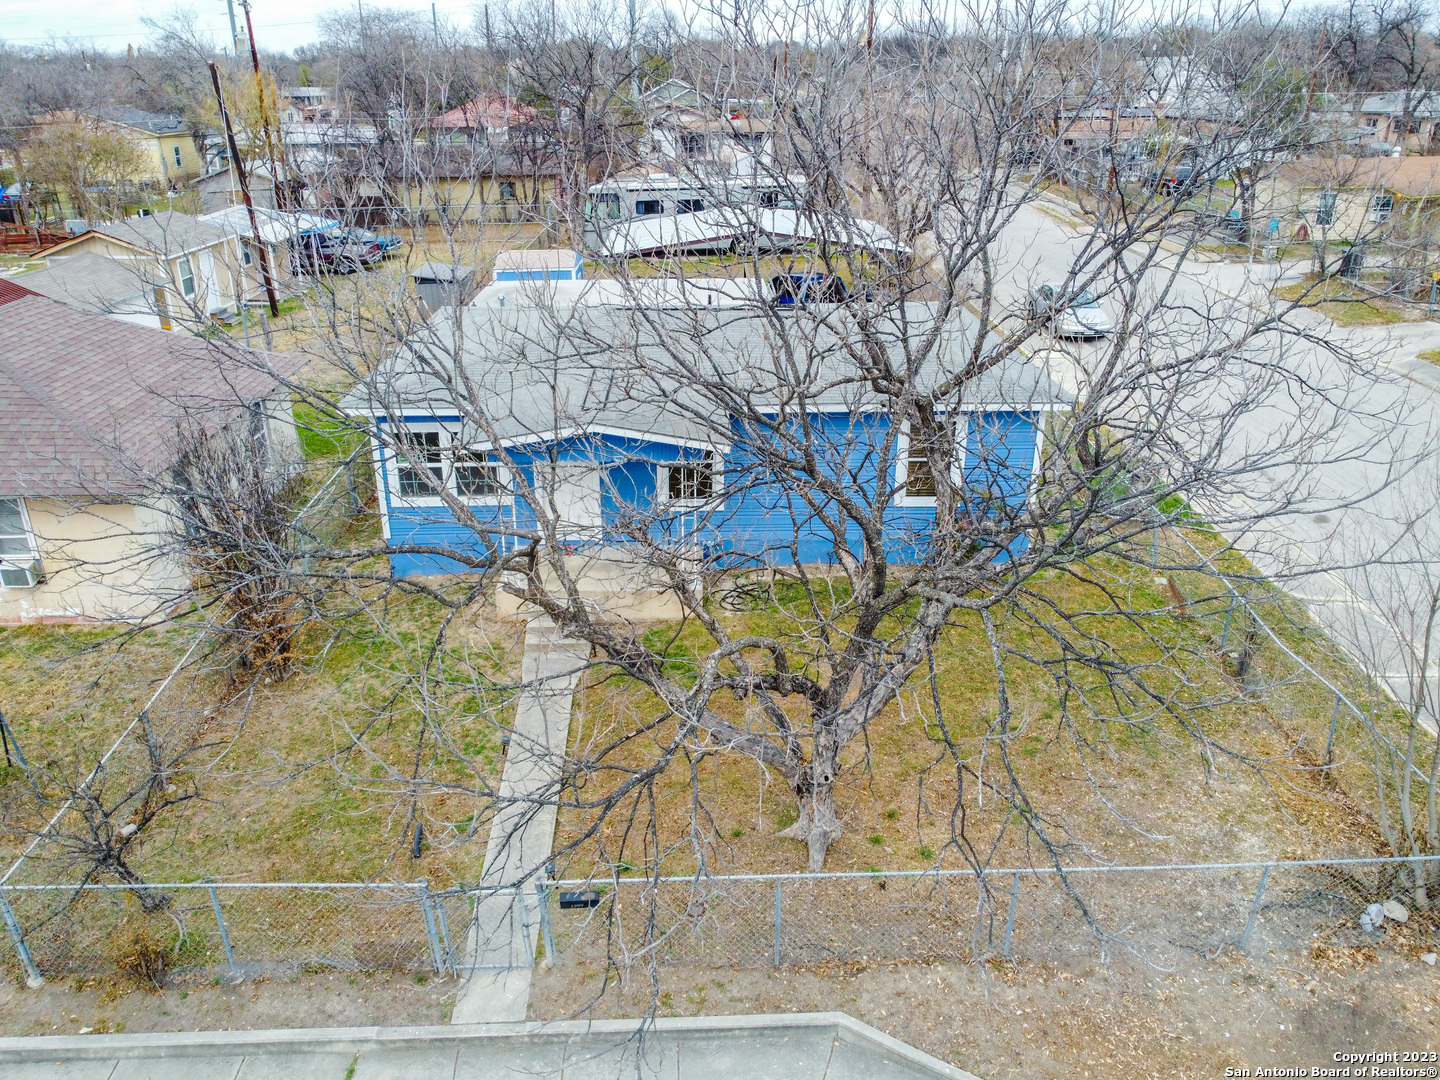 COME CHECK OUT THIS HOME TODAY. REMODELED HOME, NEW AC/ HEAT, KITCHEN UPGRADED, SECOND LIVING/MASTER AREA.  0.184 CORNER LOT WITH COVERED CARPORT ,  5 MIN FROM WOODLAWN PARK, 12 MIN FROM DOWTOWN SA, AND 3 MIN FROM OLLU.